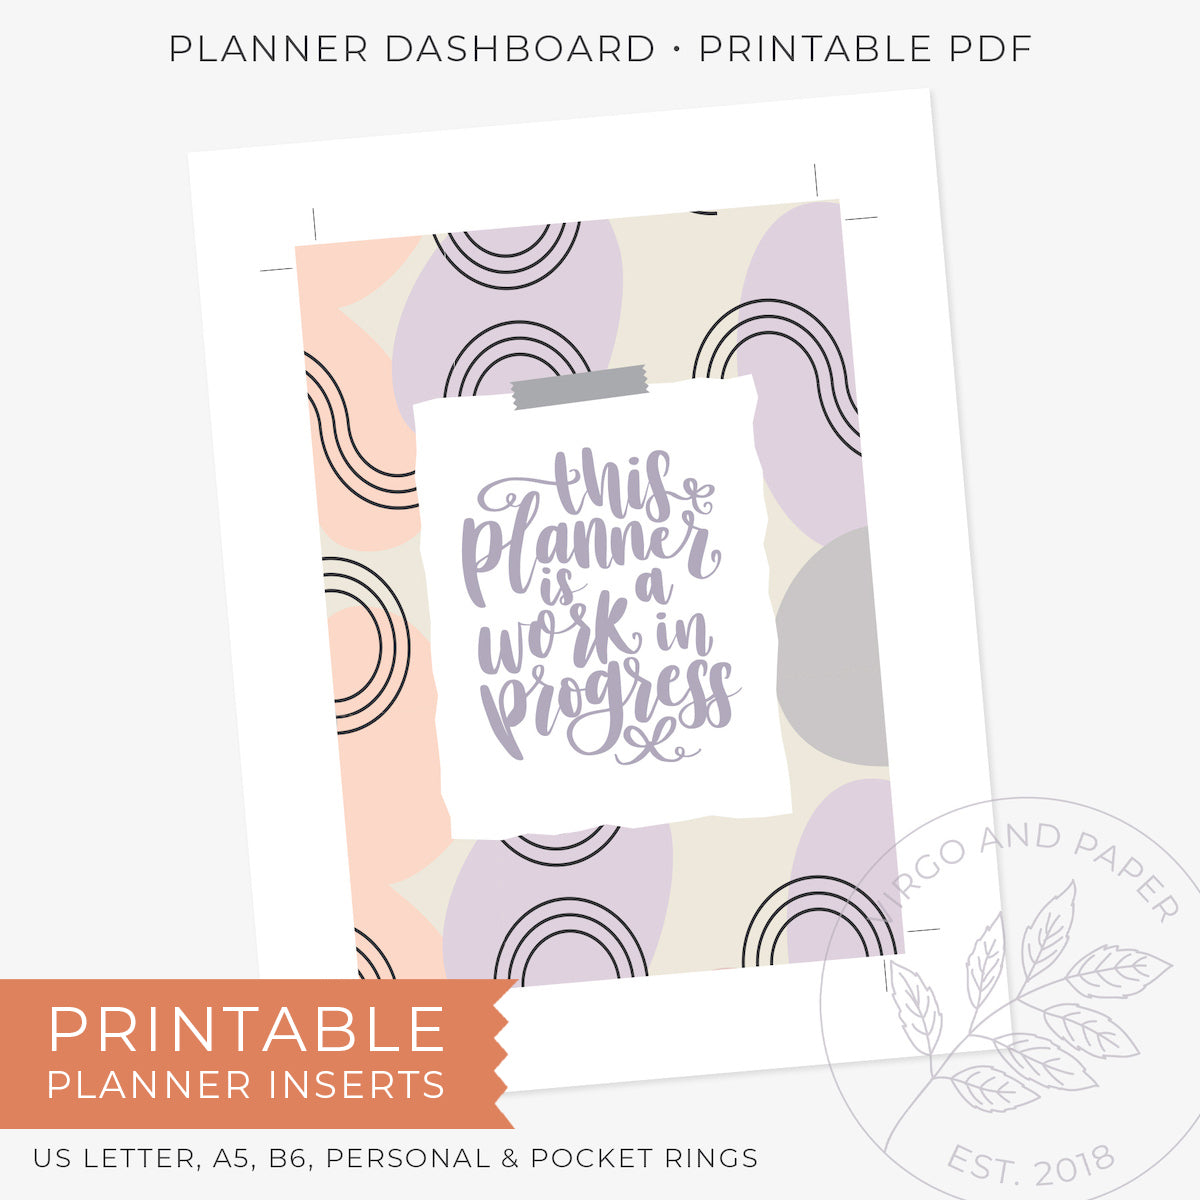 Planner Dashboard Printable - This Planner Is a Work in Progress v.1